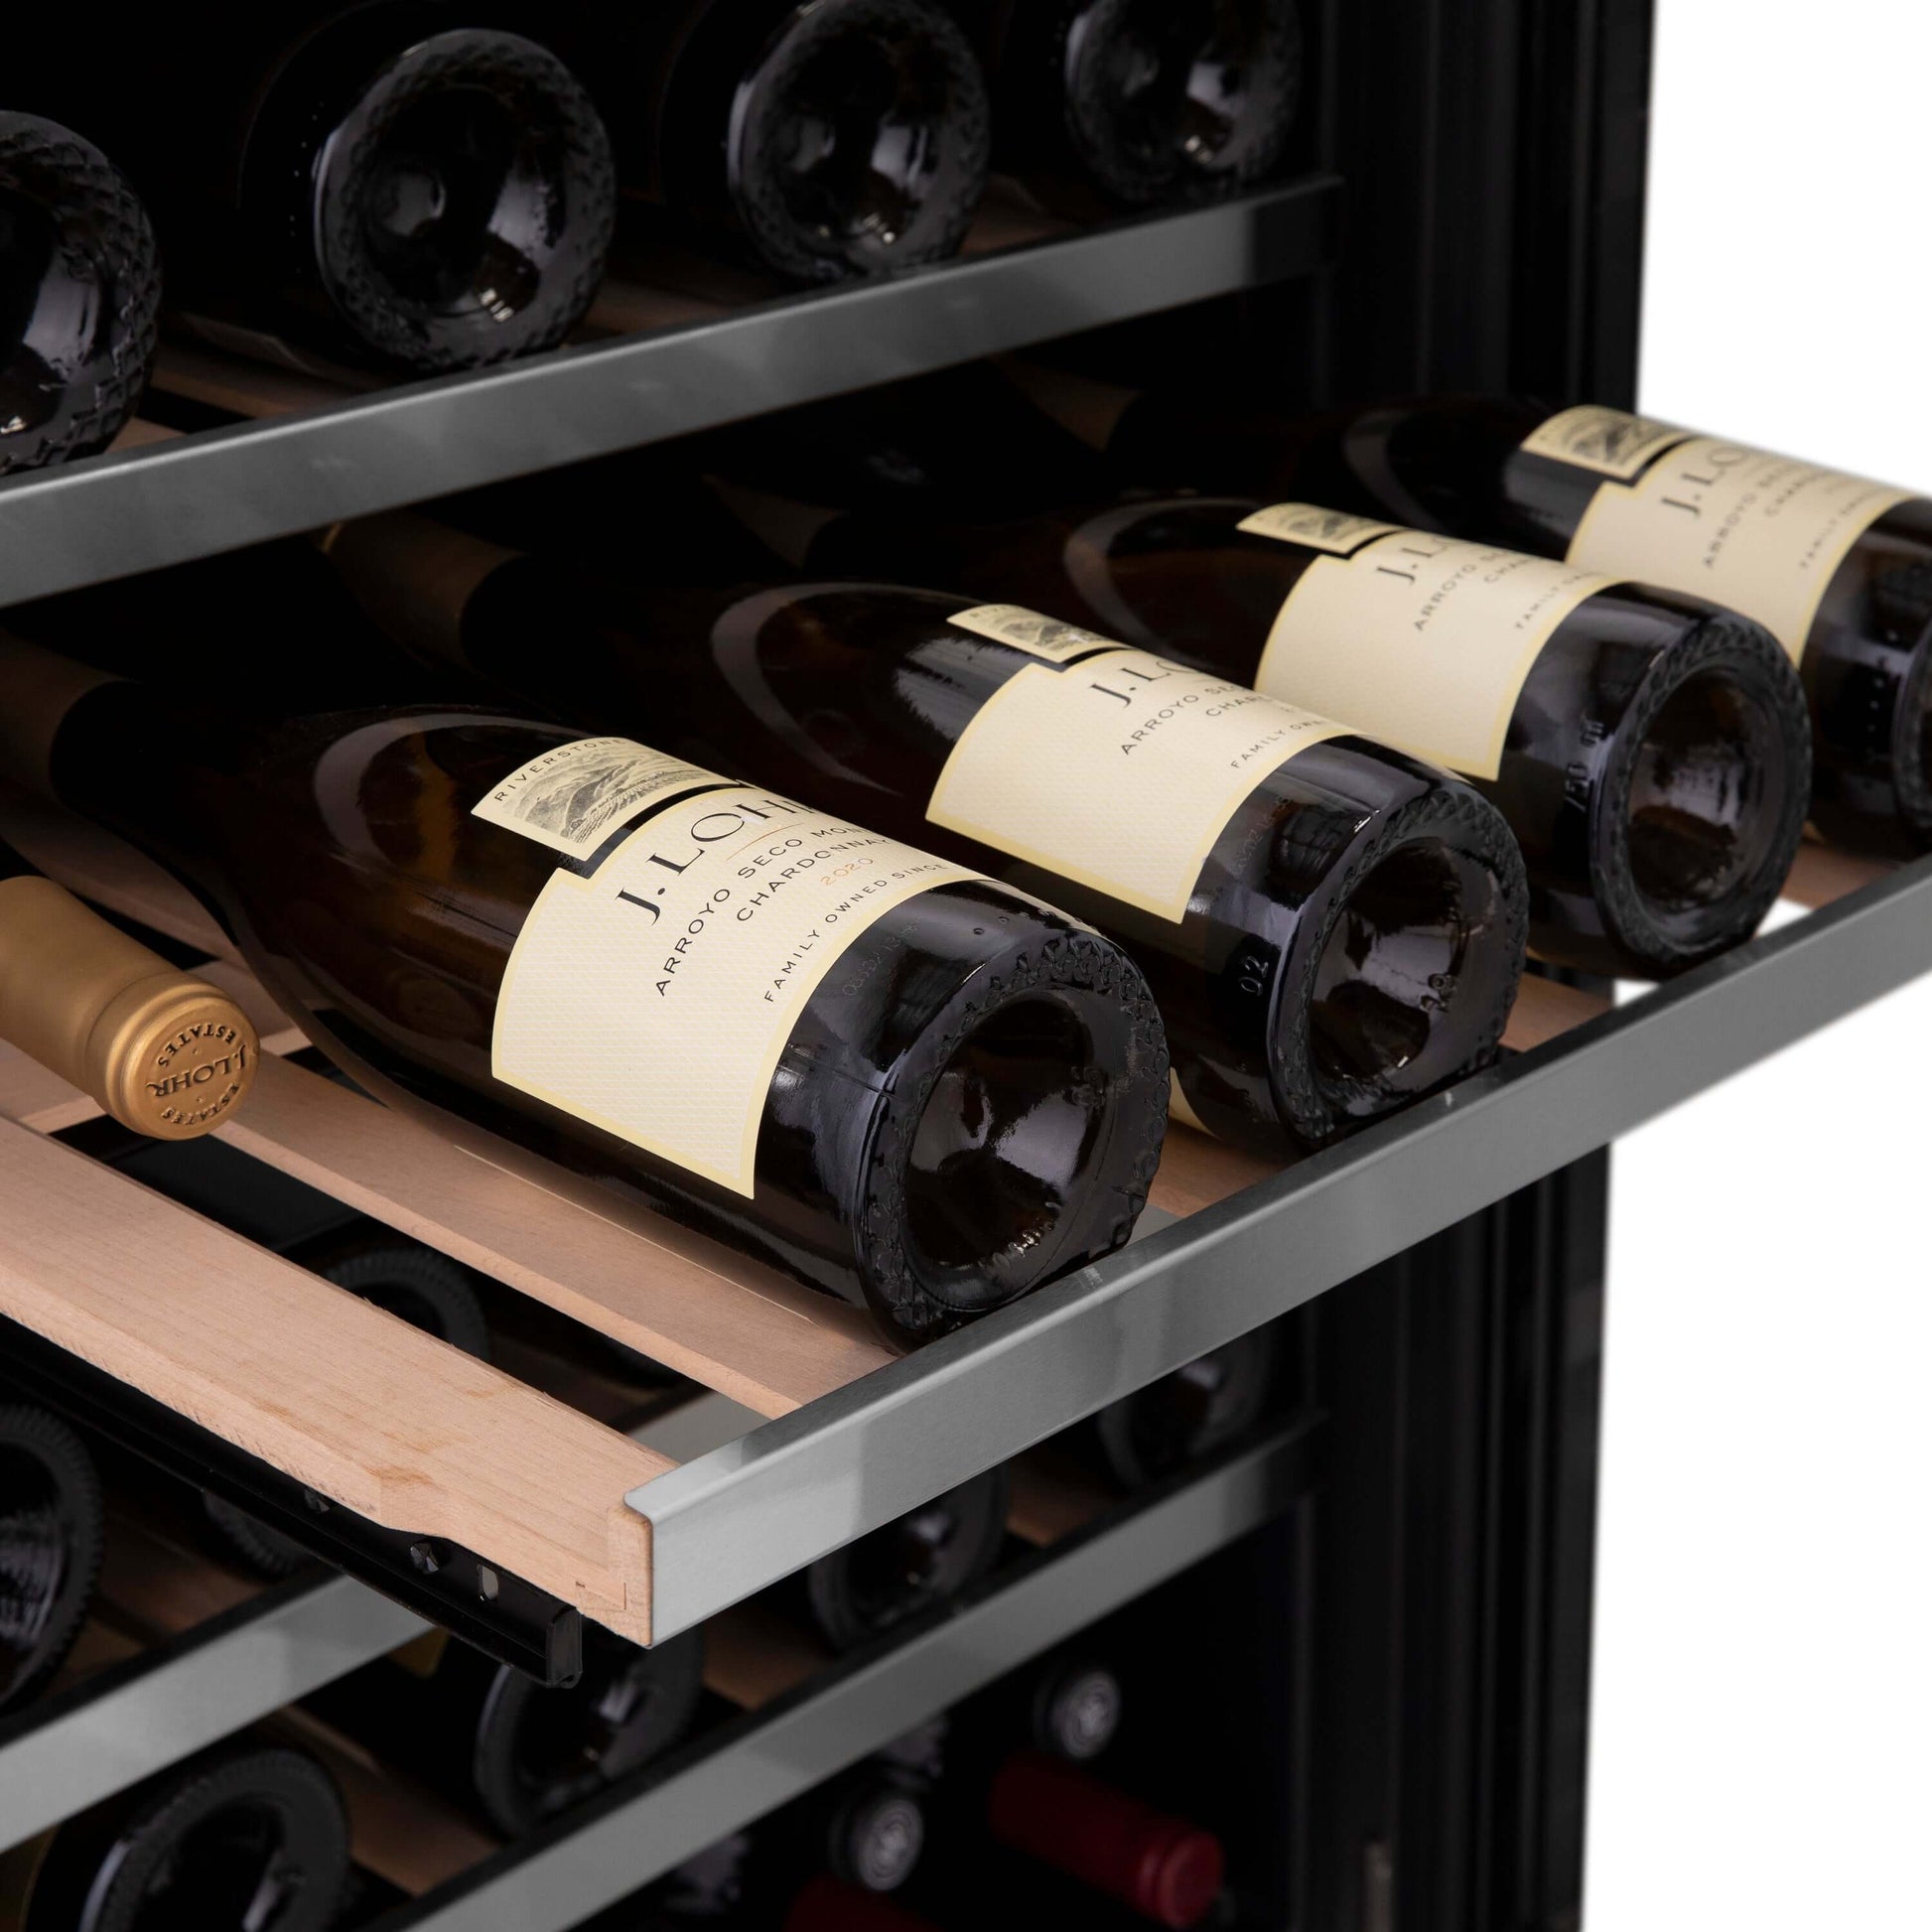 ZLINE 24" Monument Dual Zone 44 Bottle Wine Cooler - Stainless Steel with Wood Shelf